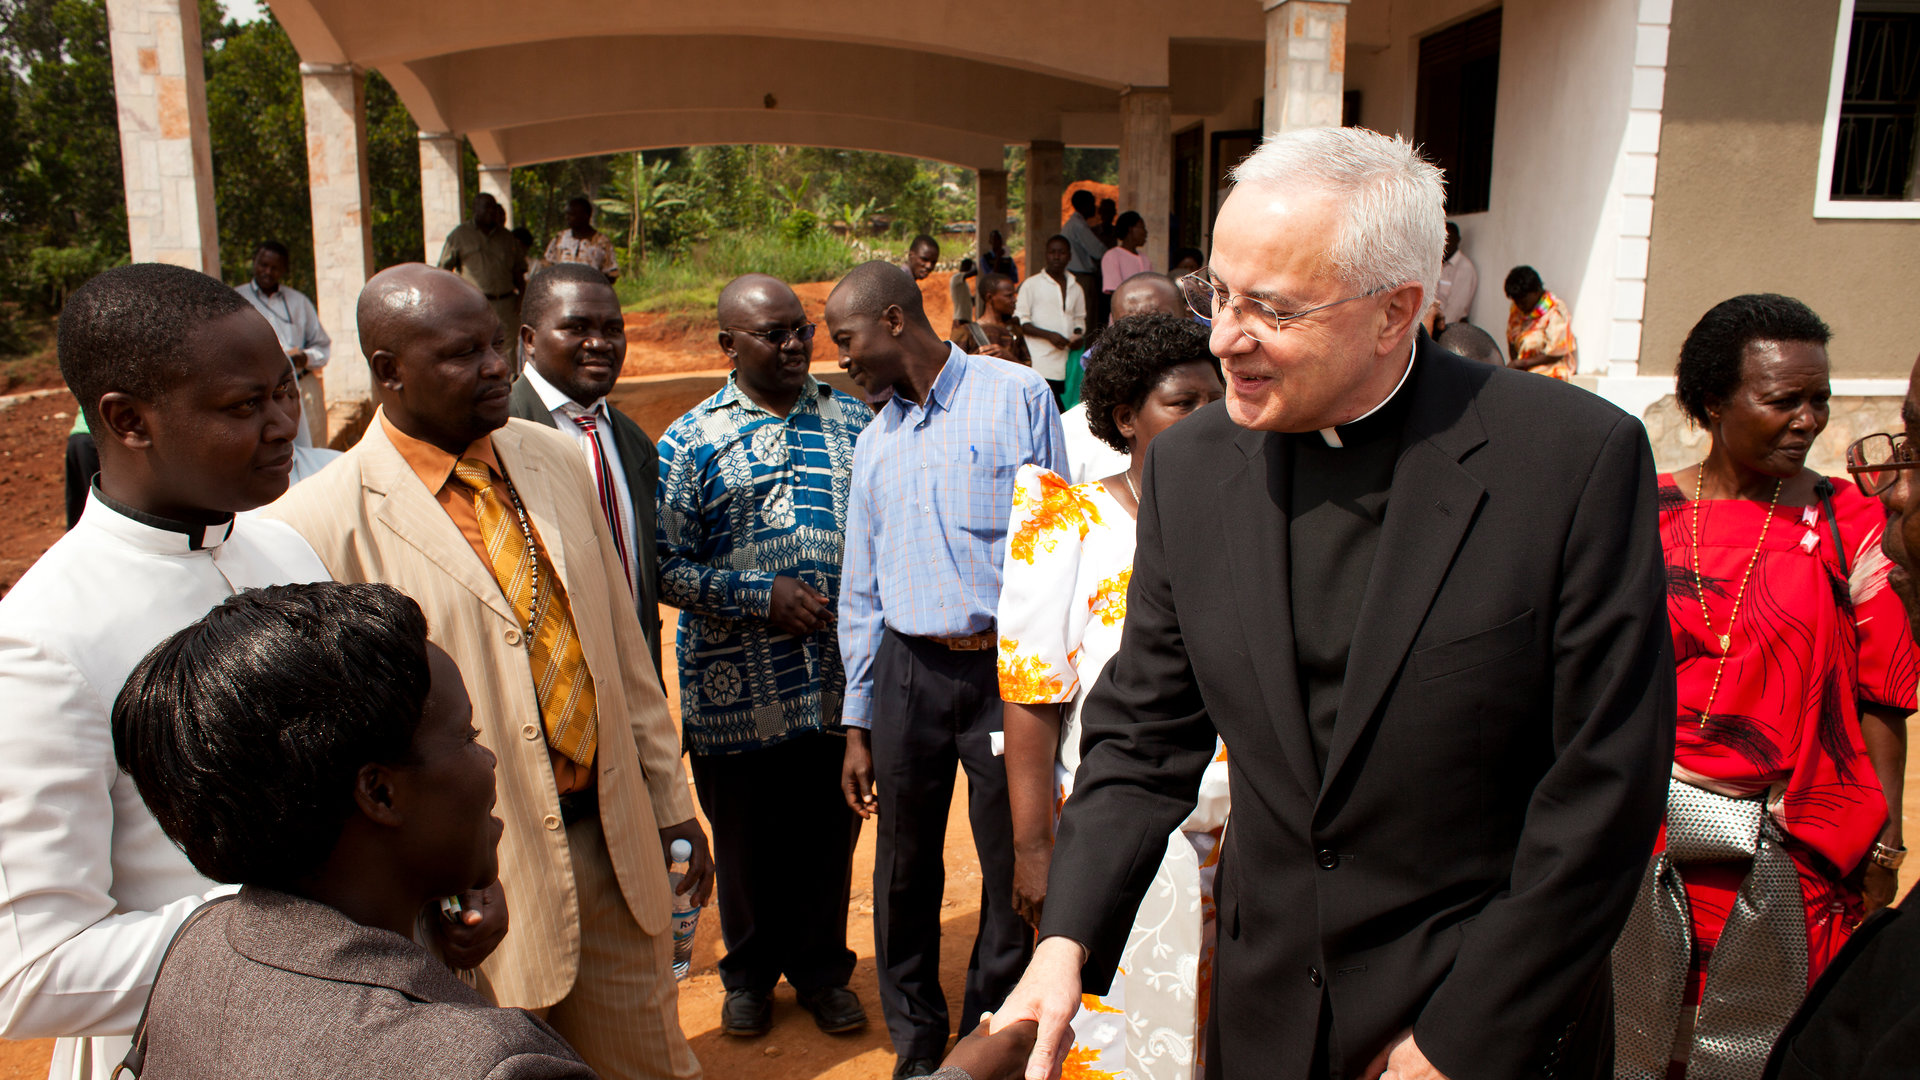 father Dennis Dease shakes hands with locals in Uganda